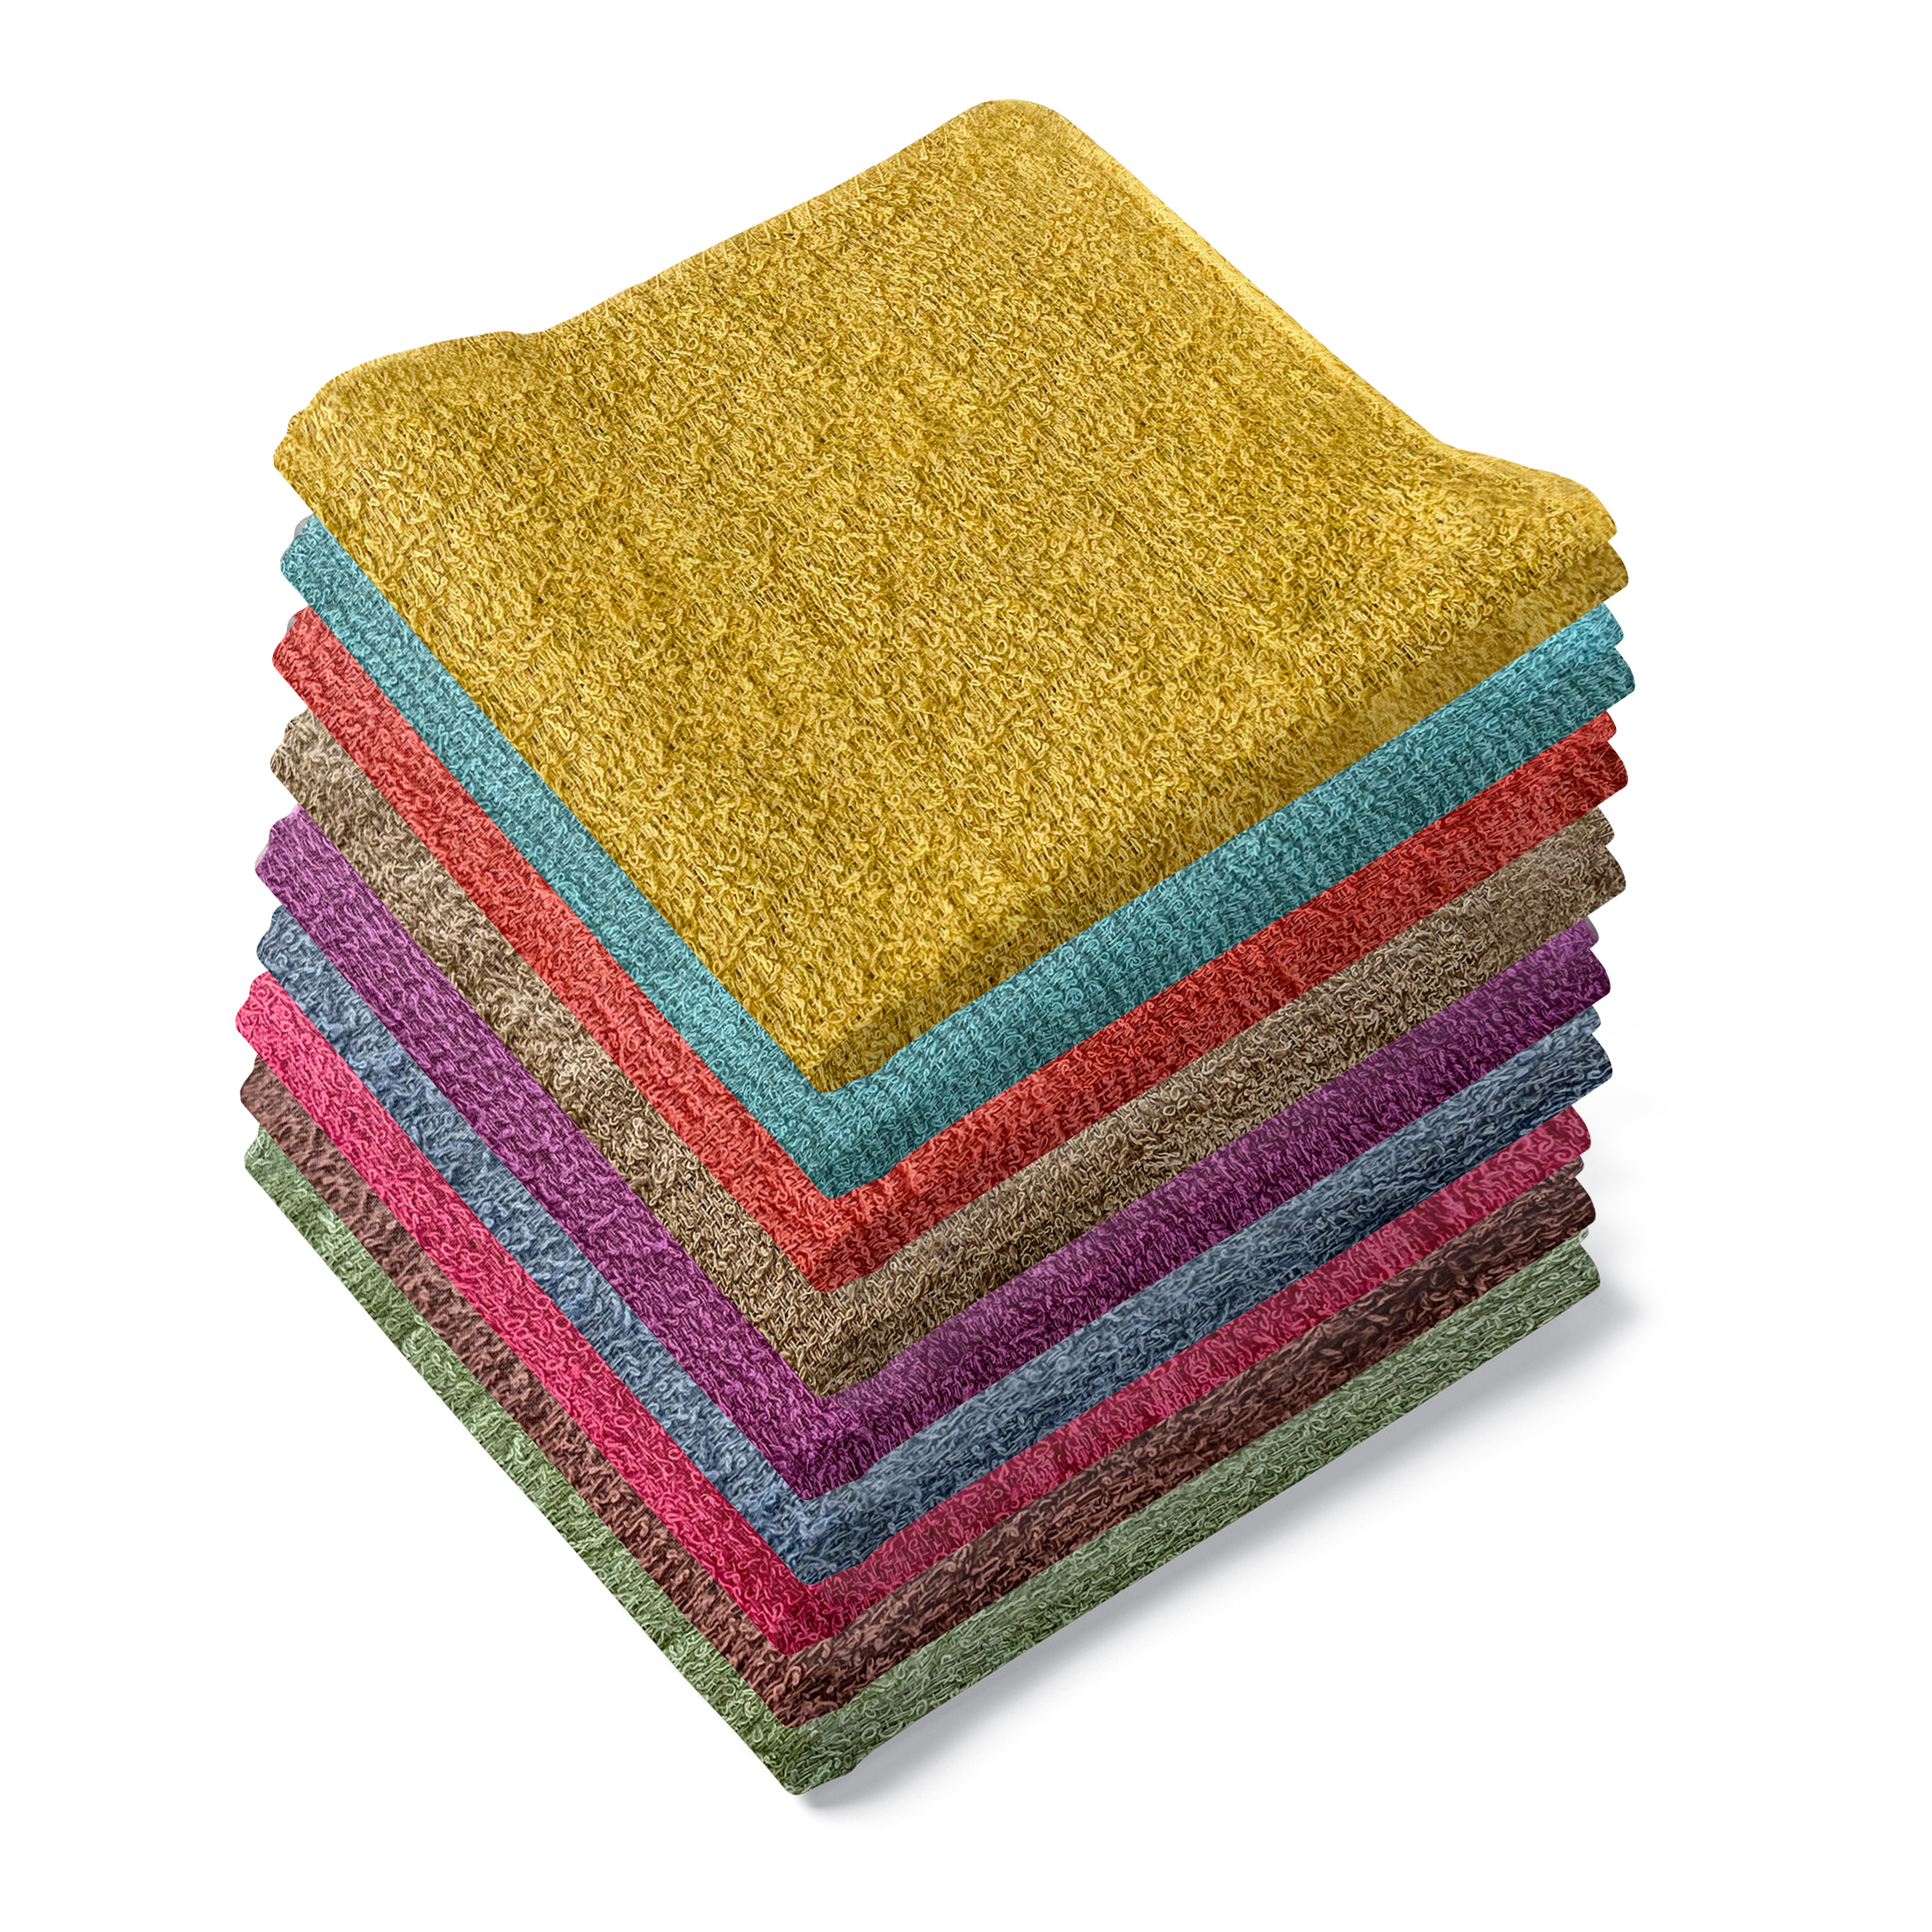 24-Pack: 100% Soft Cotton Absorbent Dish Wash Cloths